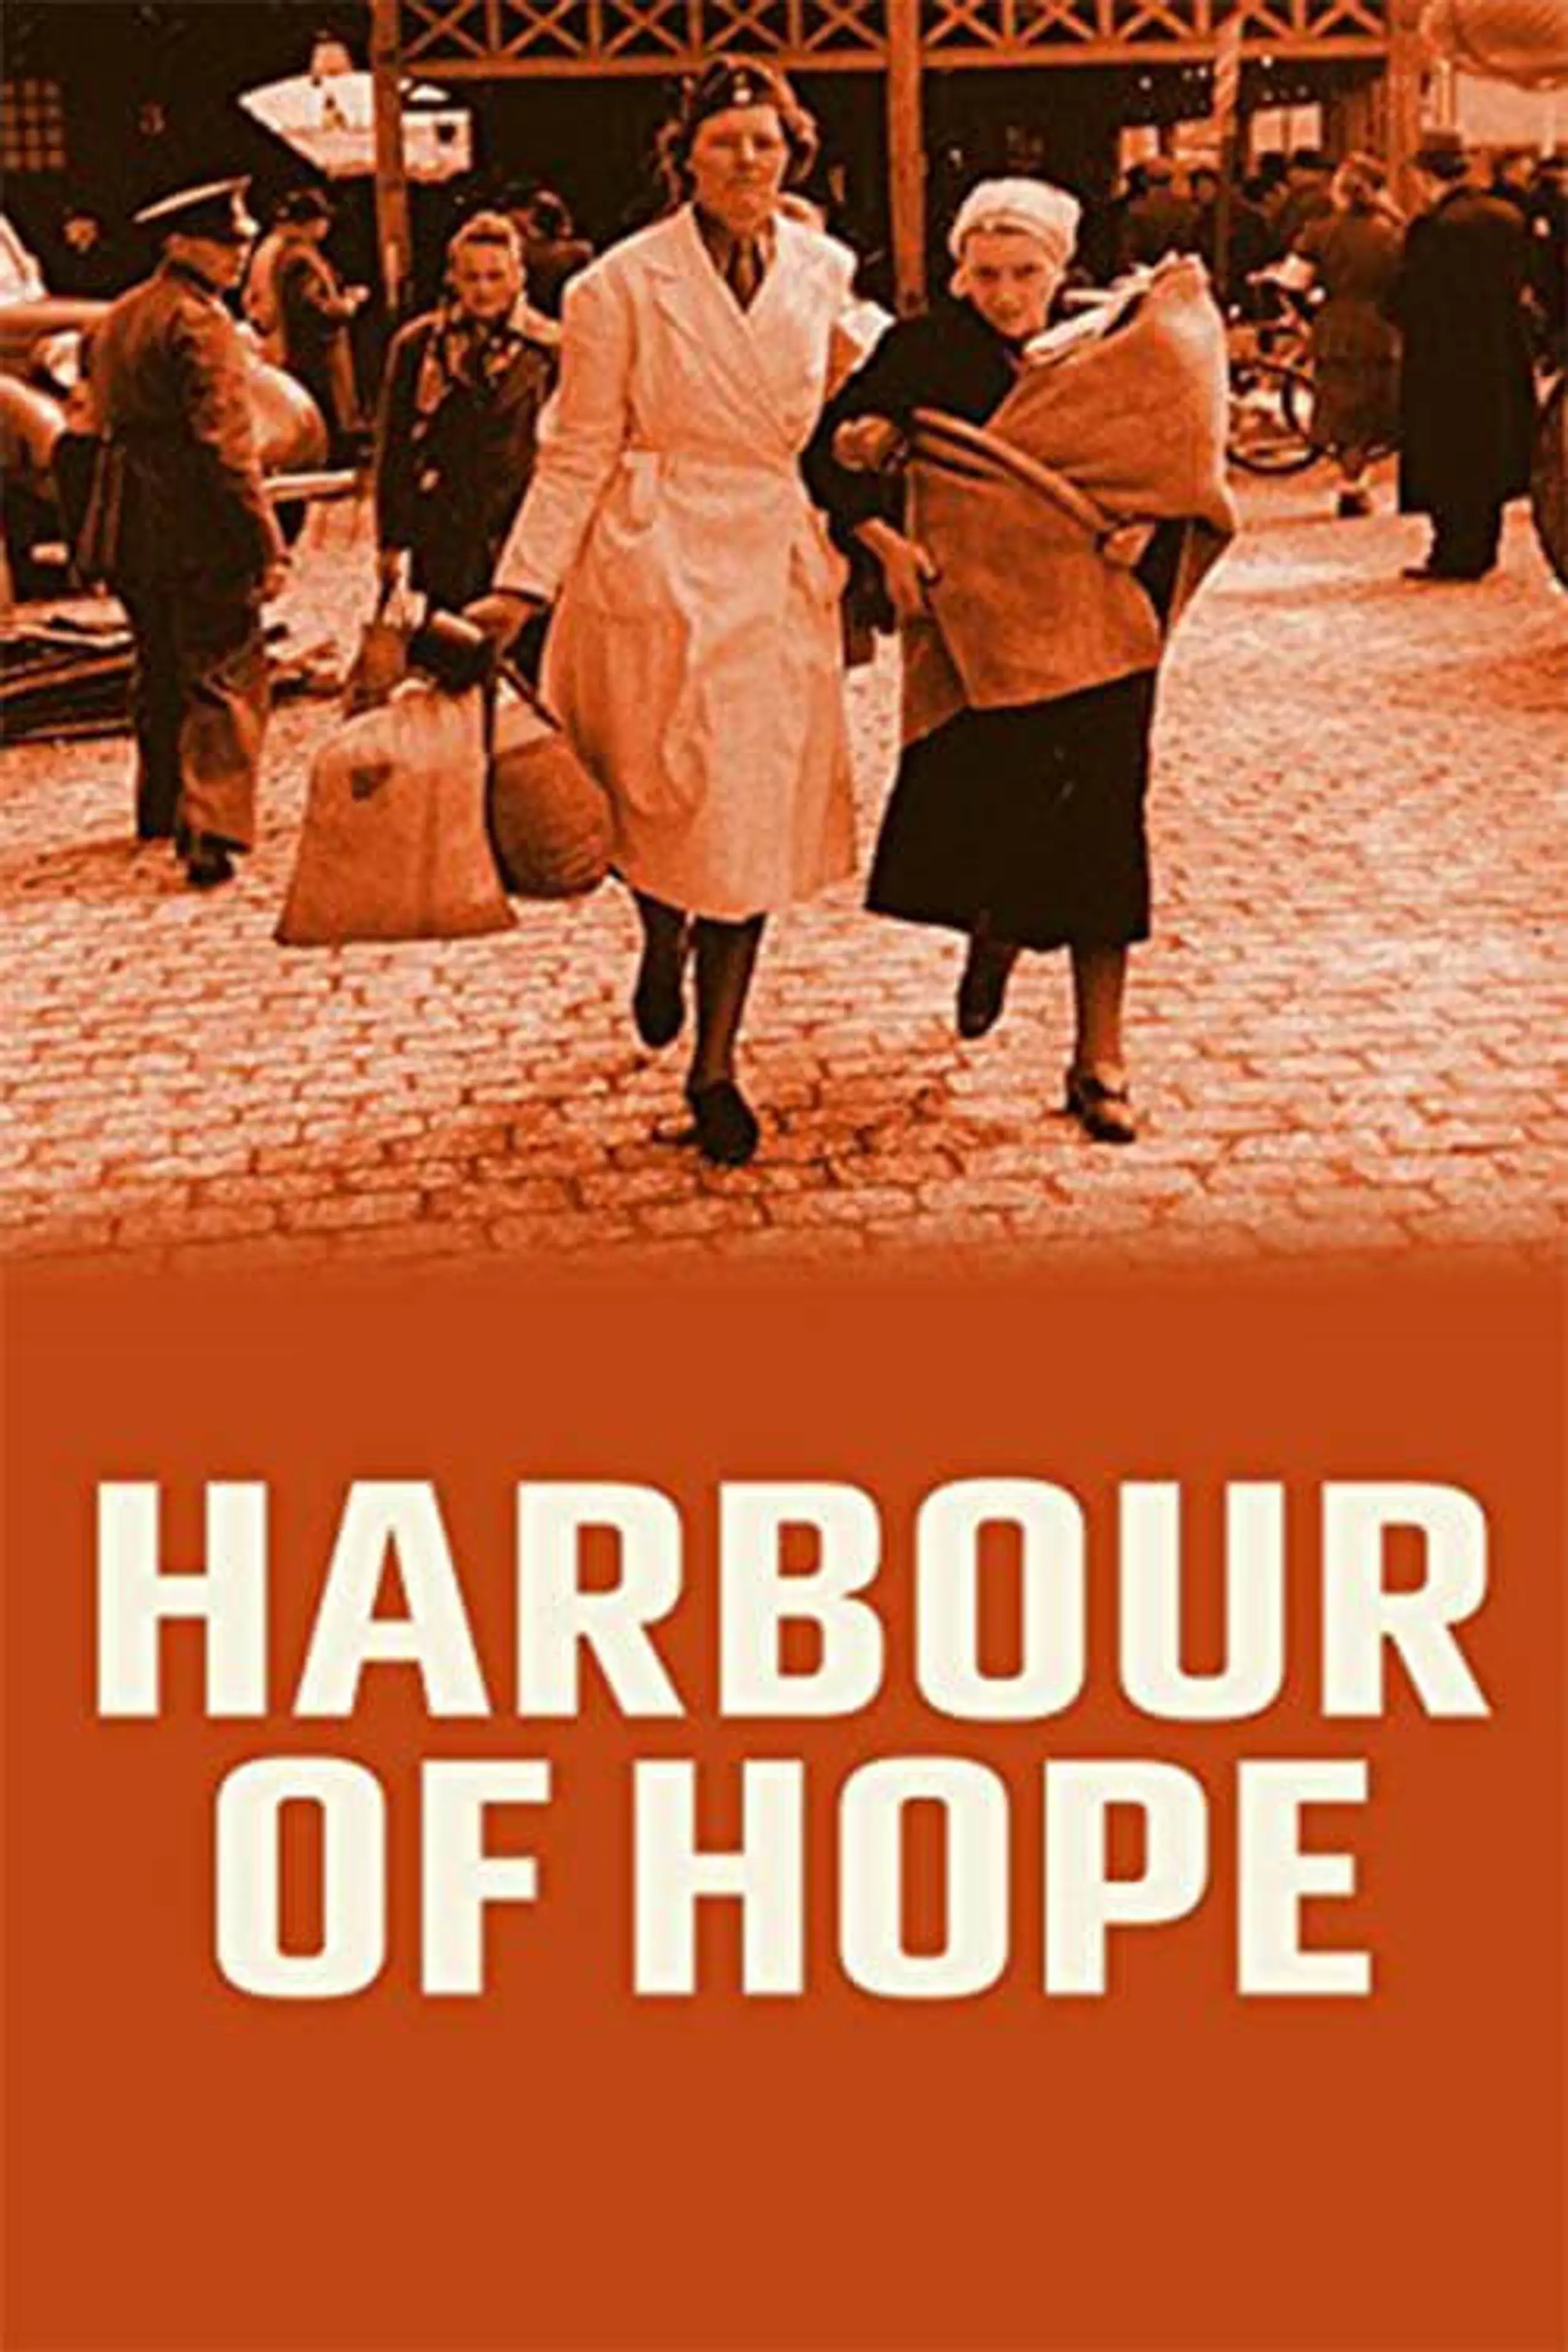 Harbour of Hope